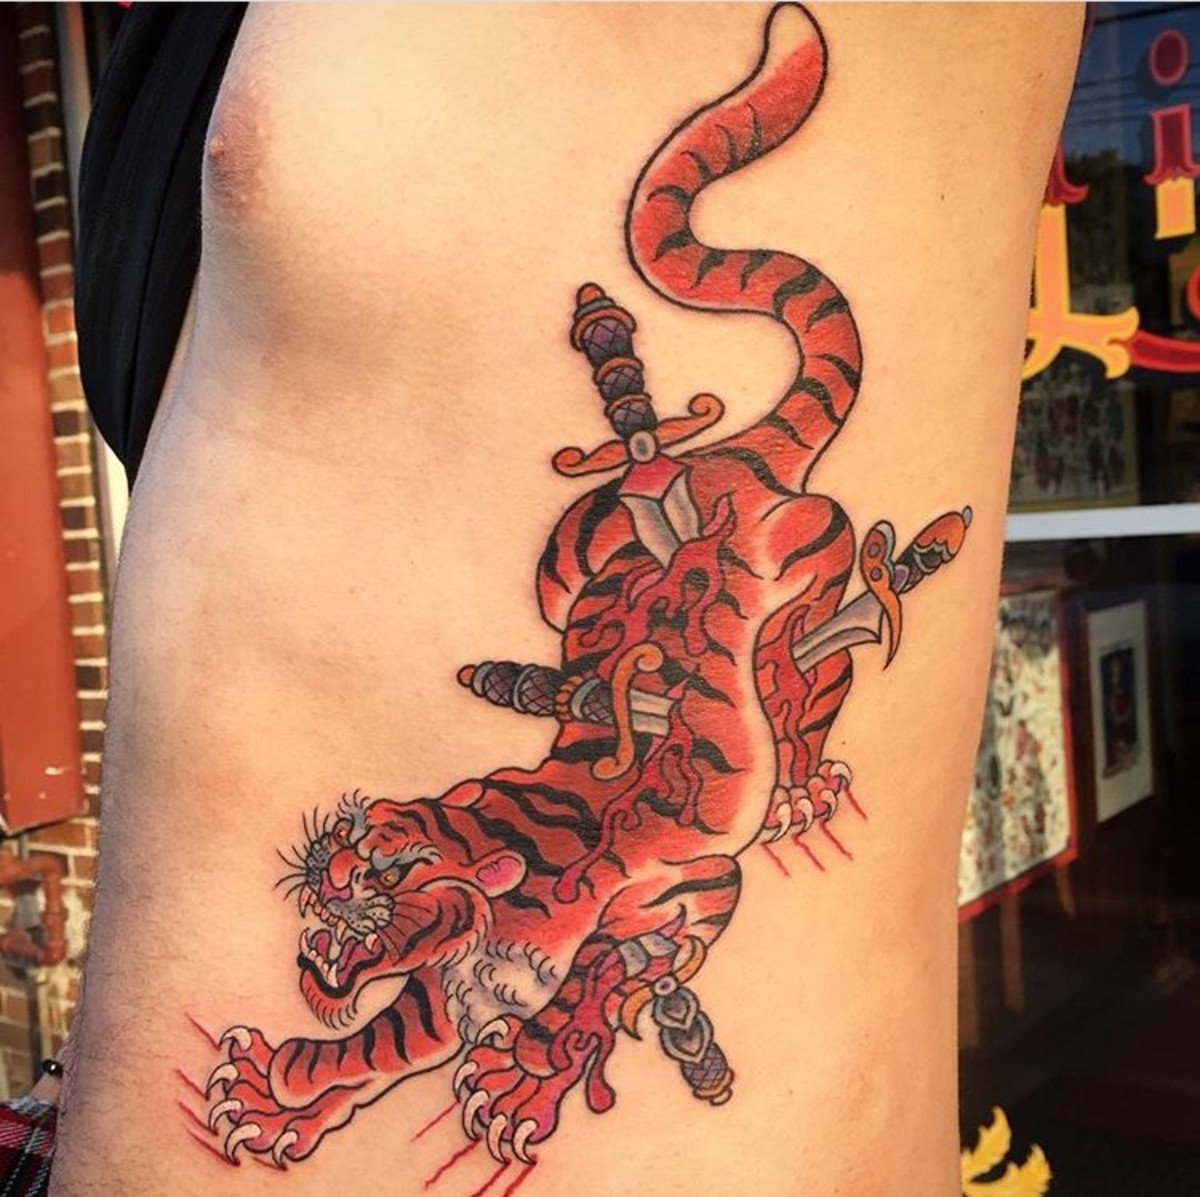 The Complete Guide to Popular Los Angeles Tattoo Styles – Chronic Ink